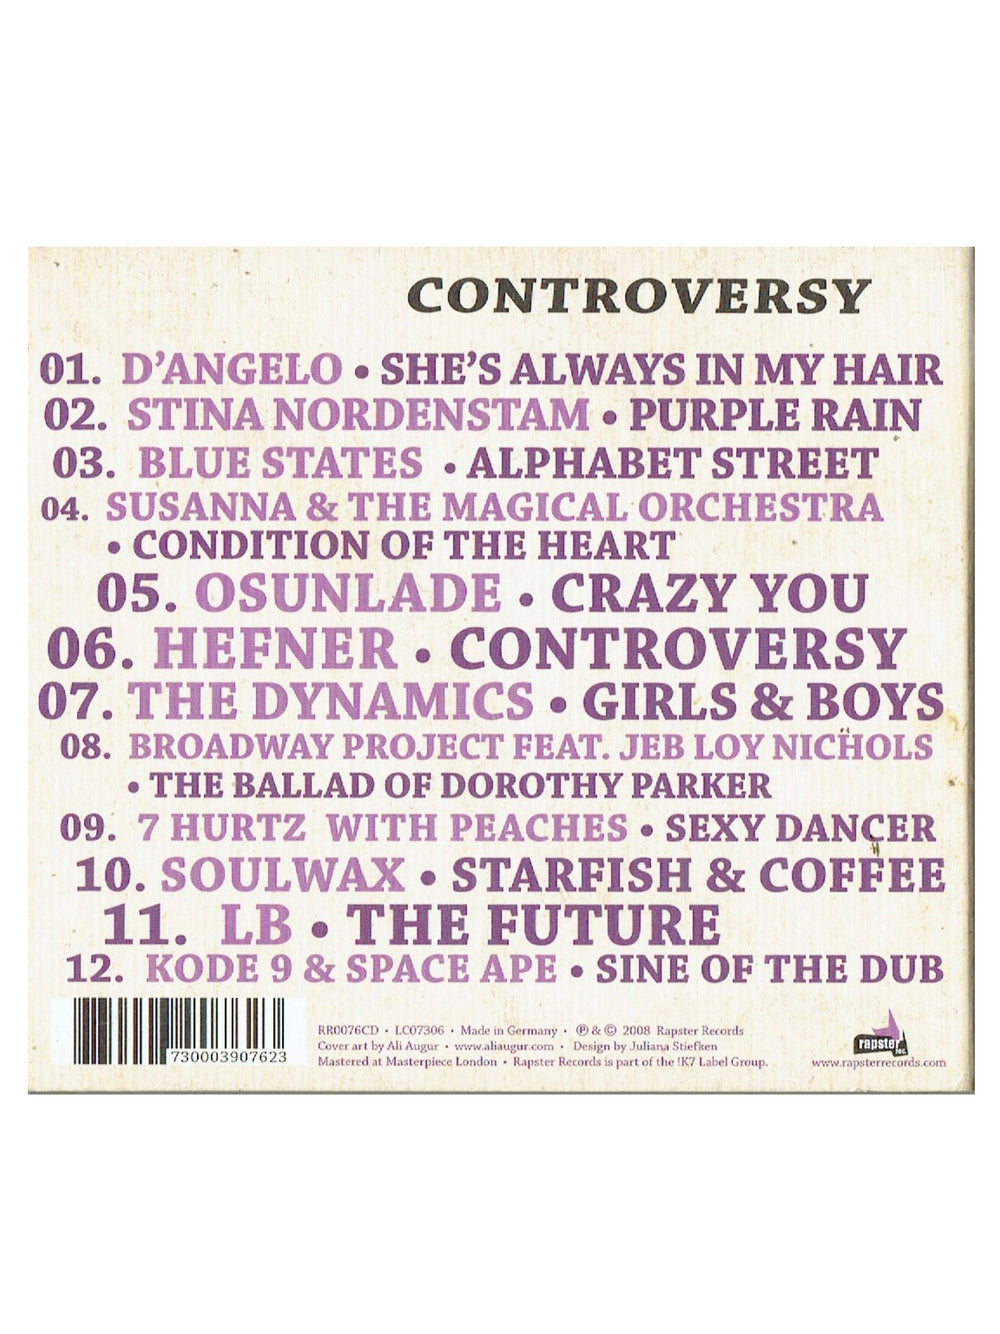 Prince – Controversy CD Album Various Cover Versions Prince